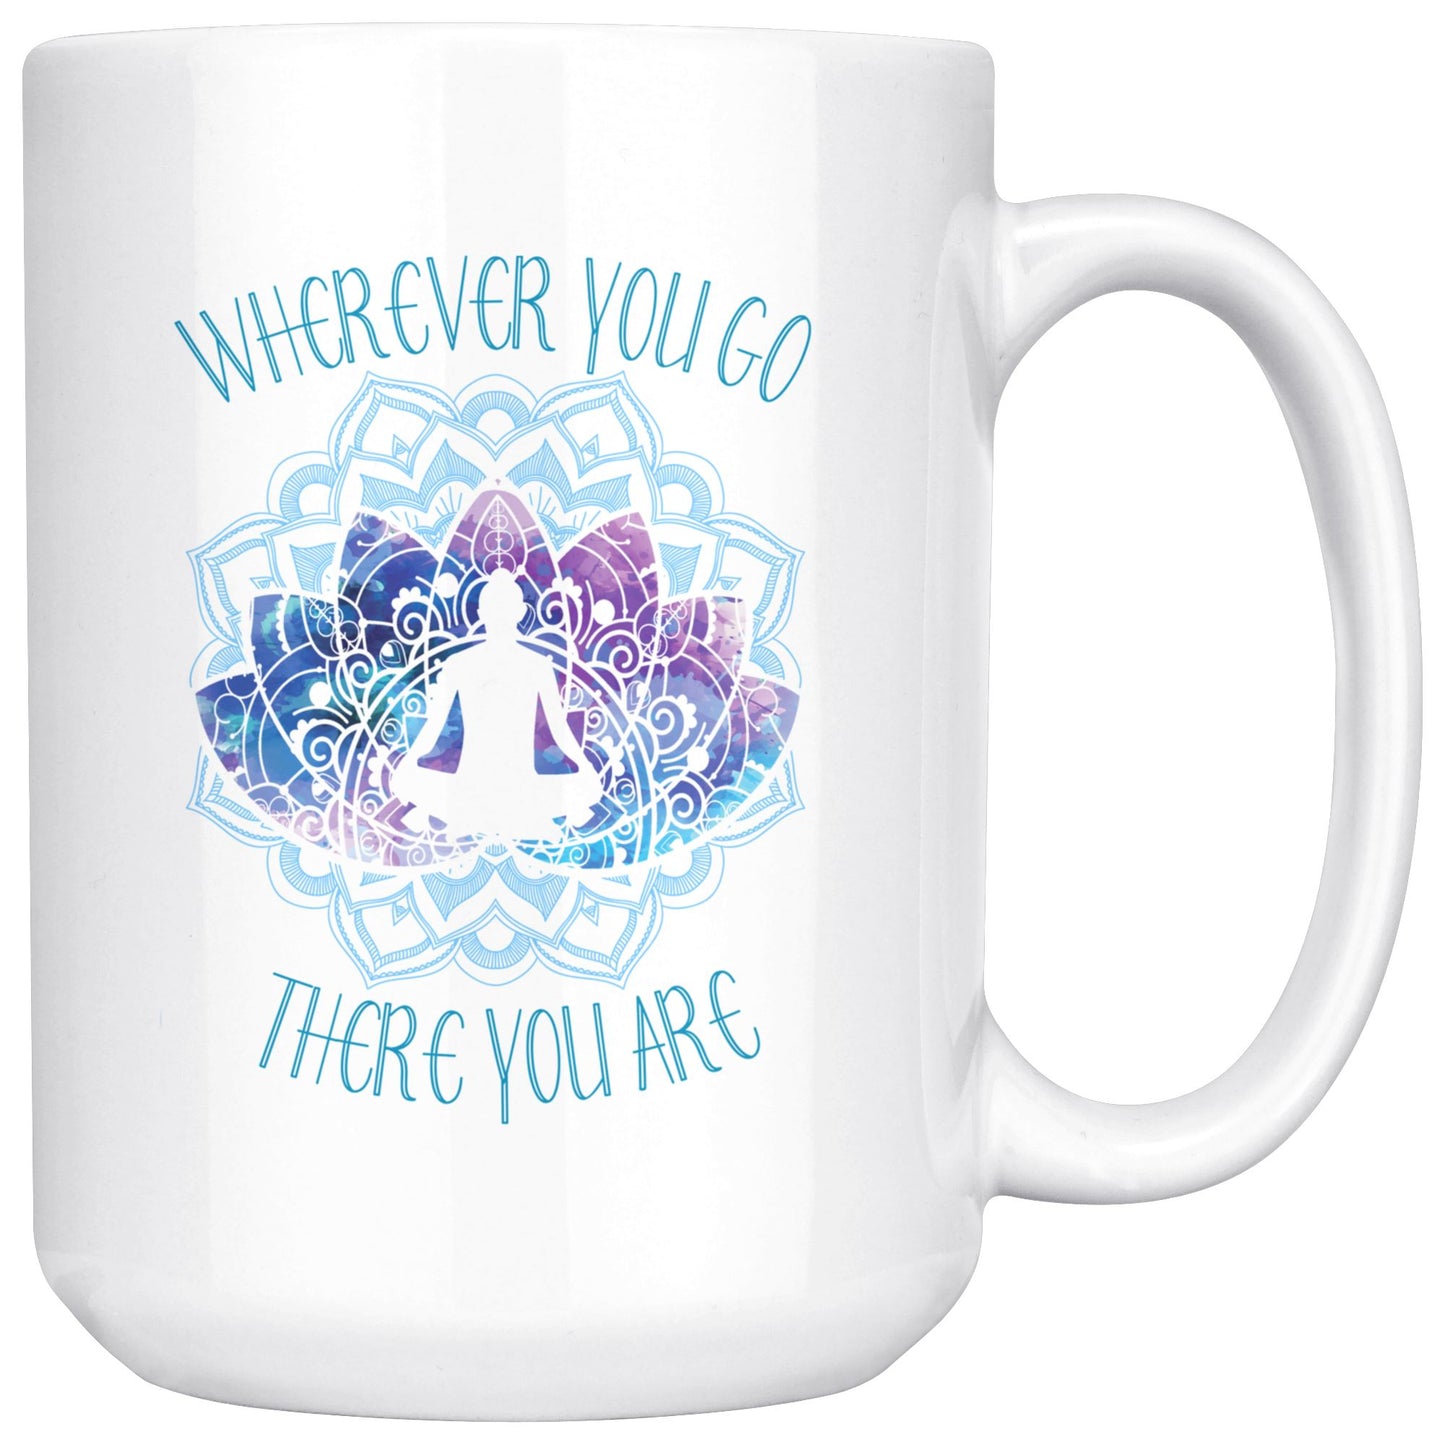 Wherever You GO...There You Are Ceramic Coffee Mug for Yoga Lovers, Meditation, Zen, Relaxation and a reminder to Just Let Go